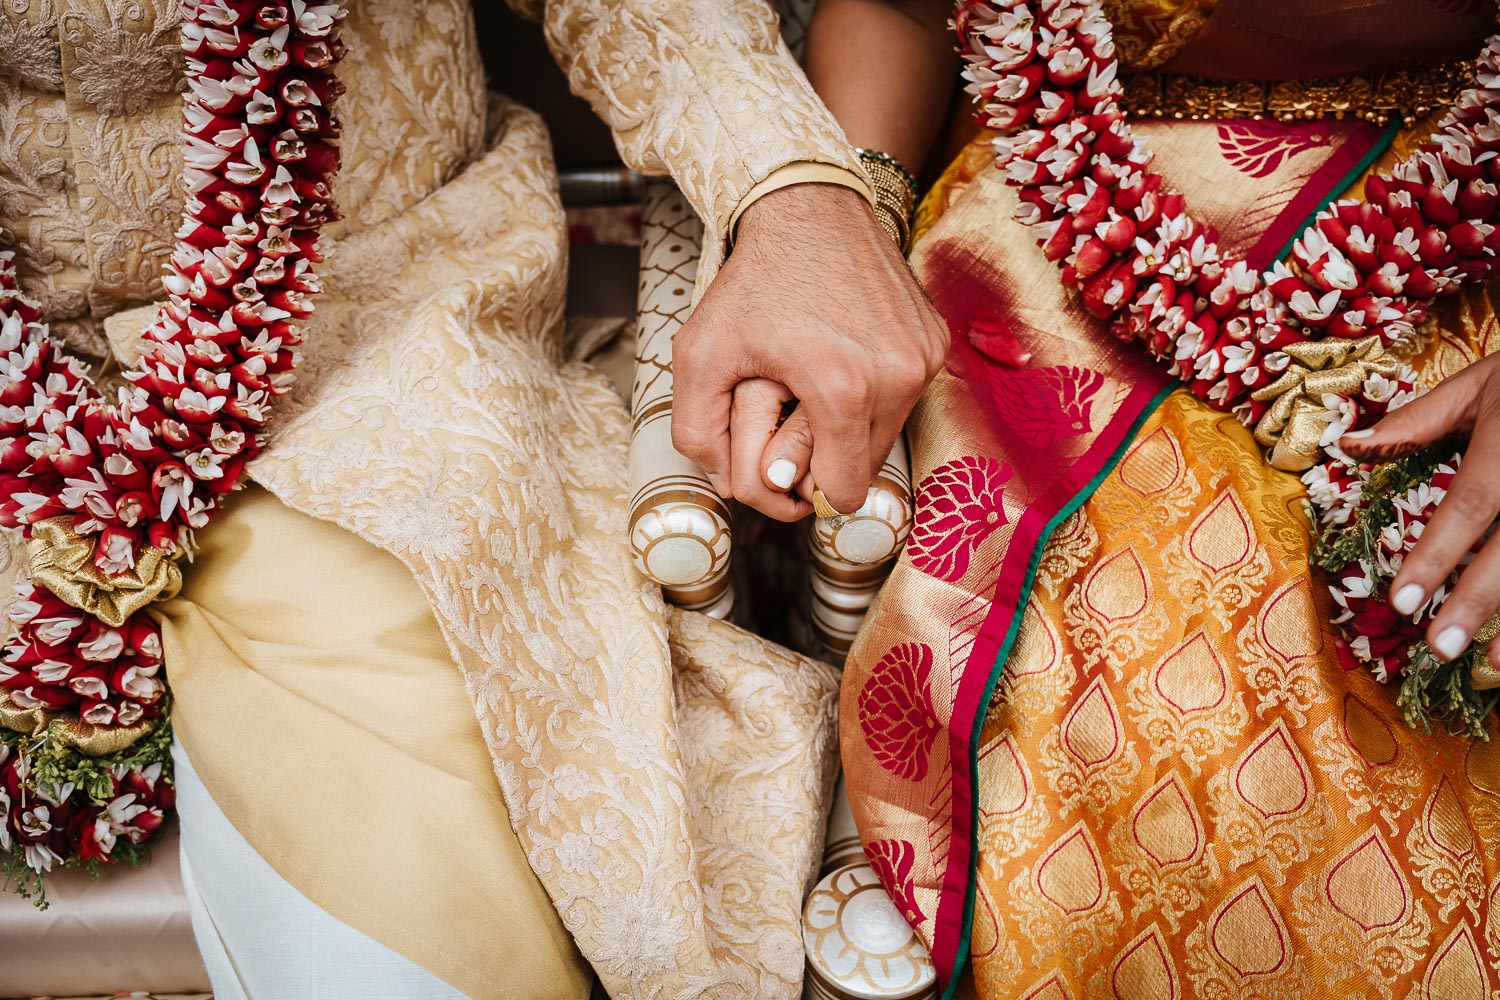 During a south asian wedding ceremony couple hold hands